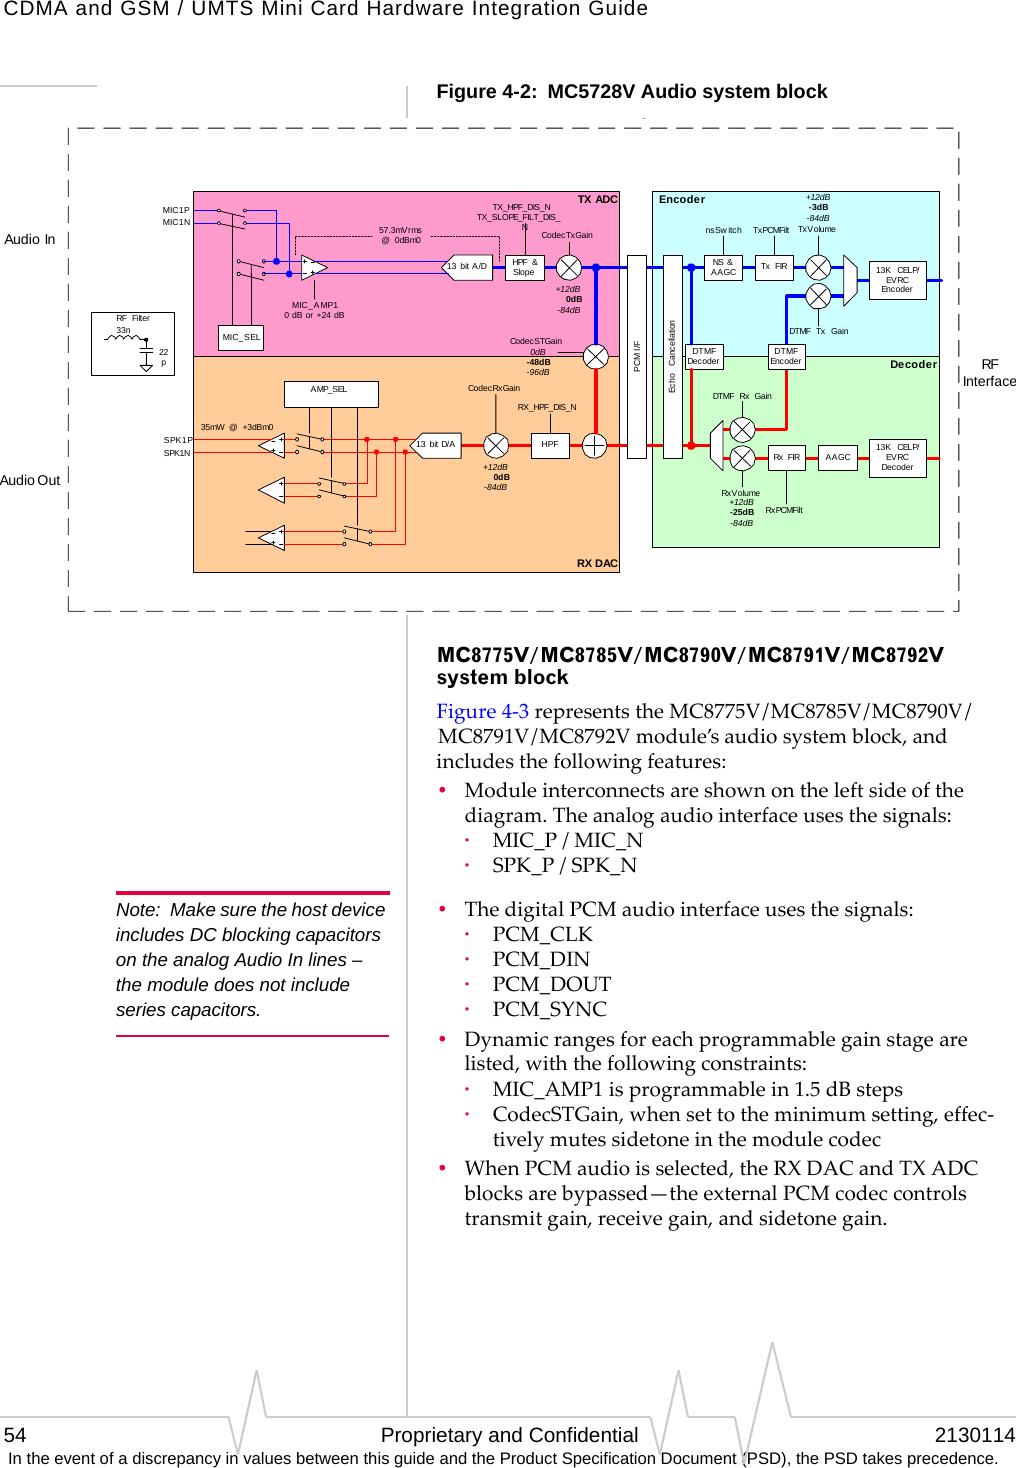 CDMA and GSM / UMTS Mini Card Hardware Integration Guide54 Proprietary and Confidential 2130114 In the event of a discrepancy in values between this guide and the Product Specification Document (PSD), the PSD takes precedence.Figure 4-2:  MC5728V Audio system blockMC8775V / MC8785V / MC8790V / MC8791V / MC8792V system blockFigure4‐3representstheMC8775V/MC8785V/MC8790V/MC8791V/MC8792Vmodule’saudiosystemblock,andincludesthefollowingfeatures:•Moduleinterconnectsareshownontheleftsideofthediagram.Theanalogaudiointerfaceusesthesignals:·MIC_P/MIC_N·SPK_P/SPK_NNote: Make sure the host device includes DC blocking capacitors on the analog Audio In lines – the module does not include series capacitors.•ThedigitalPCMaudiointerfaceusesthesignals:·PCM_CLK·PCM_DIN·PCM_DOUT·PCM_SYNC•Dynamicrangesforeachprogrammablegainstagearelisted,withthefollowingconstraints:·MIC_AMP1isprogrammablein1.5dBsteps·CodecSTGain,whensettotheminimumsetting,effec‐tivelymutessidetoneinthemodulecodec•WhenPCMaudioisselected,theRXDACandTXADCblocksarebypassed—theexternalPCMcodeccontrolstransmitgain,receivegain,andsidetonegain.  DecoderRX DAC  EncoderTX ADCHPF &amp;SlopeHPFEcho CancellationNS &amp;AAGC Tx FIRRx FIR 13K CELP/EV RCDecoderAAGC13 bit A/D13 bit D/ACodecRxGainRX_HPF_DIS_NCodecSTGainCodecTxGainTX_HPF_DIS_NTX_SLOPE_FILT_DIS_NMIC_ A MP10 dB or +24 dBnsSw itch TxPCMFilt TxVolumeRxV olumeRxPCMFiltAMP_SELMIC_SEL35mW @ +3dBm0RF Filter33n22pPCM I/F+12dB-25dB-84dB+12dB-3dB-84dB+12dB    0dB-84dB0dB-48dB-96dB+12dB    0dB-84dB57.3mVrms@ 0dBm0gSPK1NSPK1PMIC1PMIC1N13K CELP/EV RCEncoderDTMFEncoderDTMF Rx  GainDTMF Tx GainDTMFDecoderAudio InAudio OutRFInterface